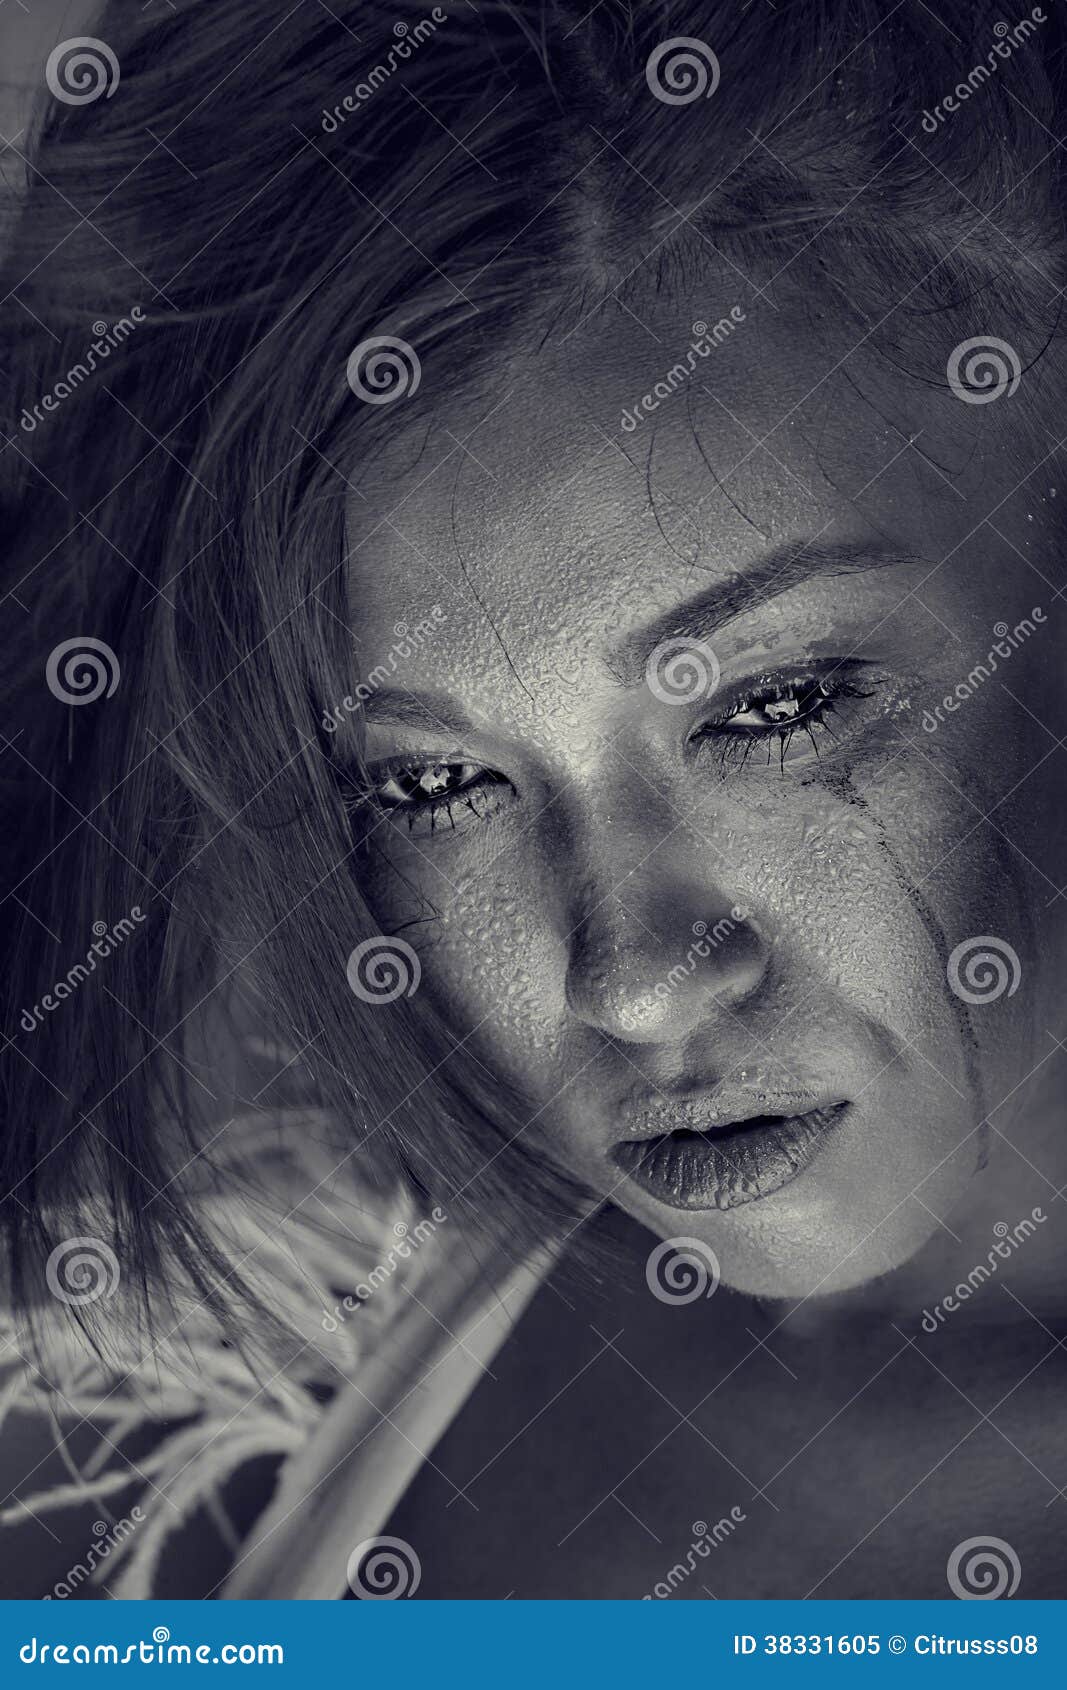 Black - White Portrait of a Crying Woman Stock Image - Image of ...